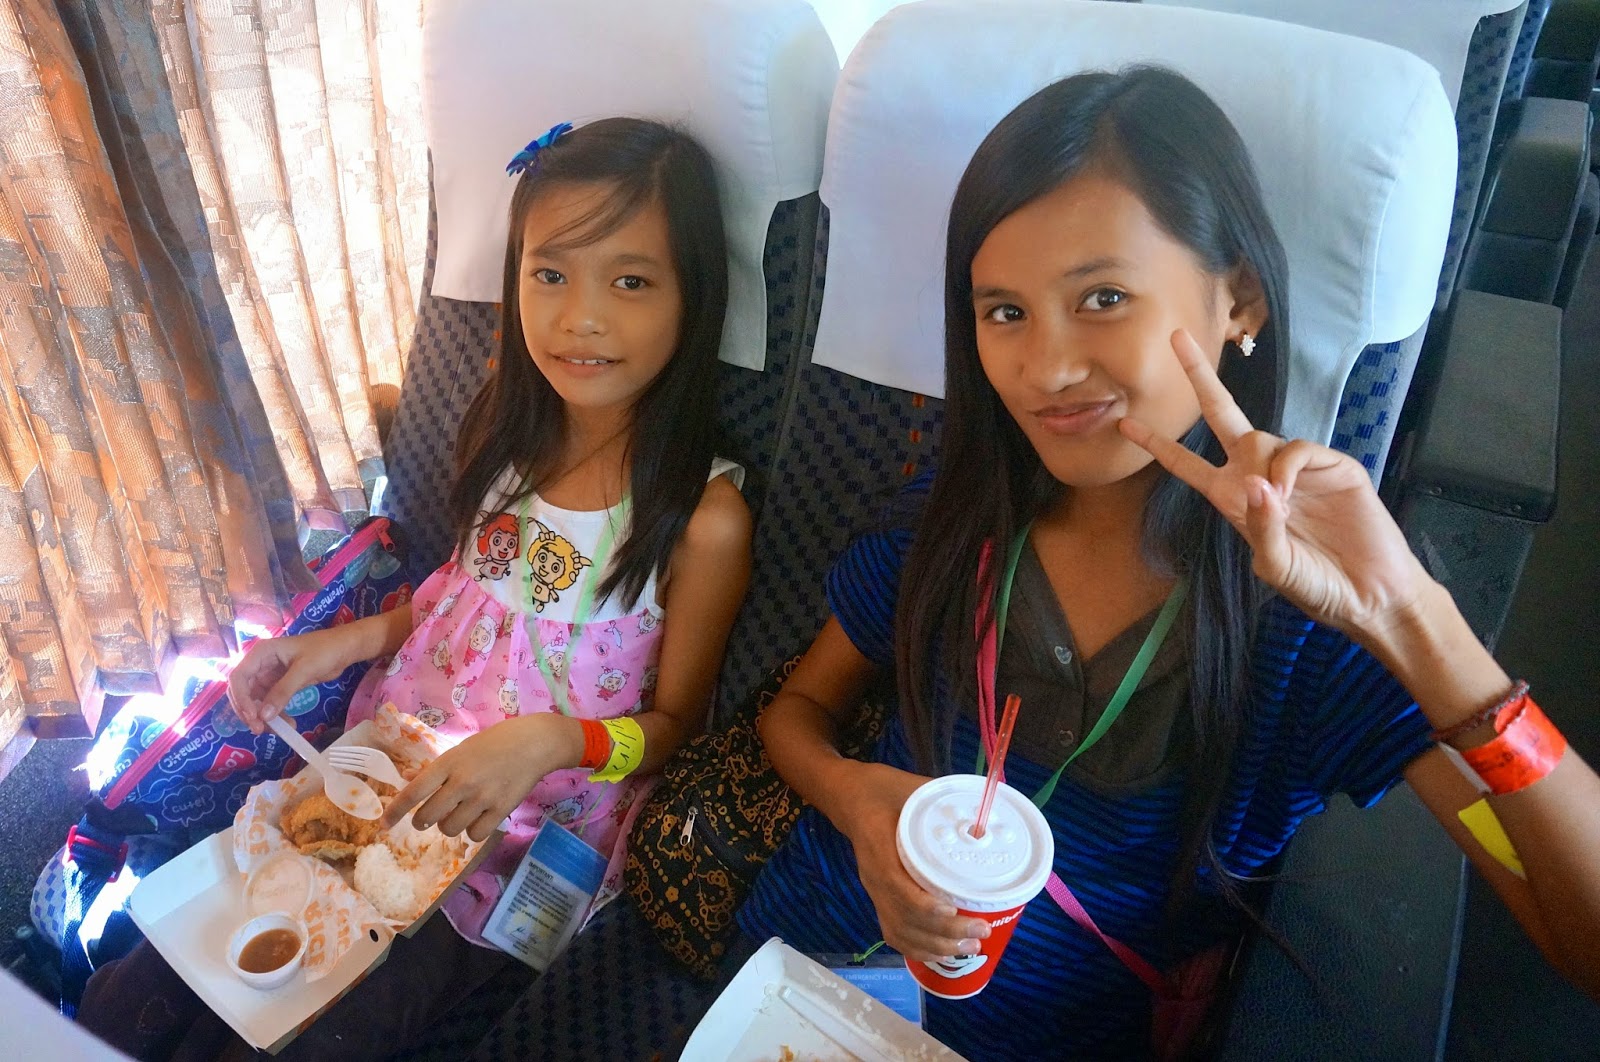 We enjoyed meals from the Filipino-favourite "Jollibee" on the bu...